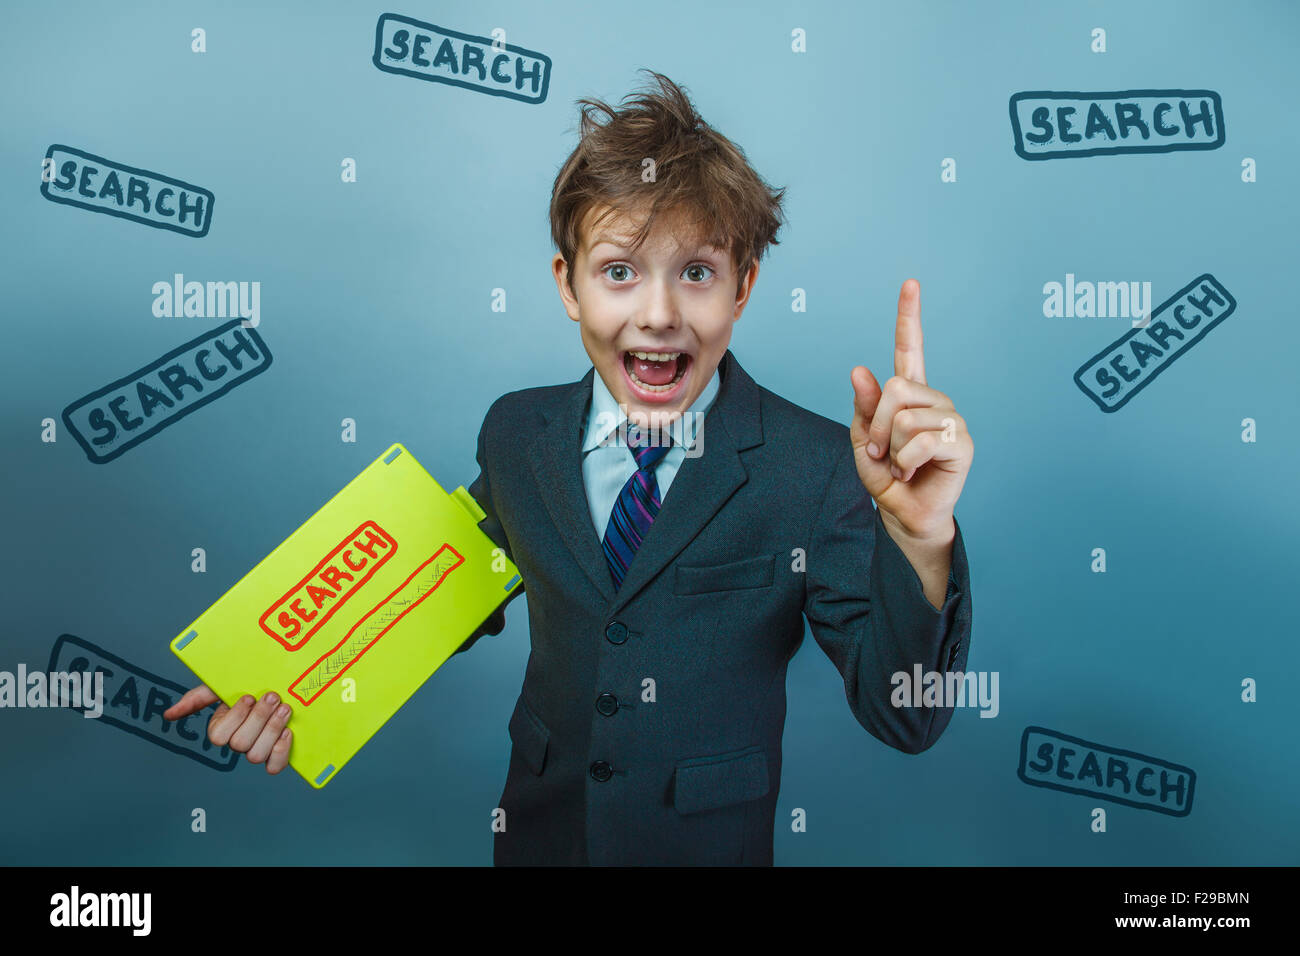 a boy of twelve European appearance in a suit holding a blank sh Stock Photo